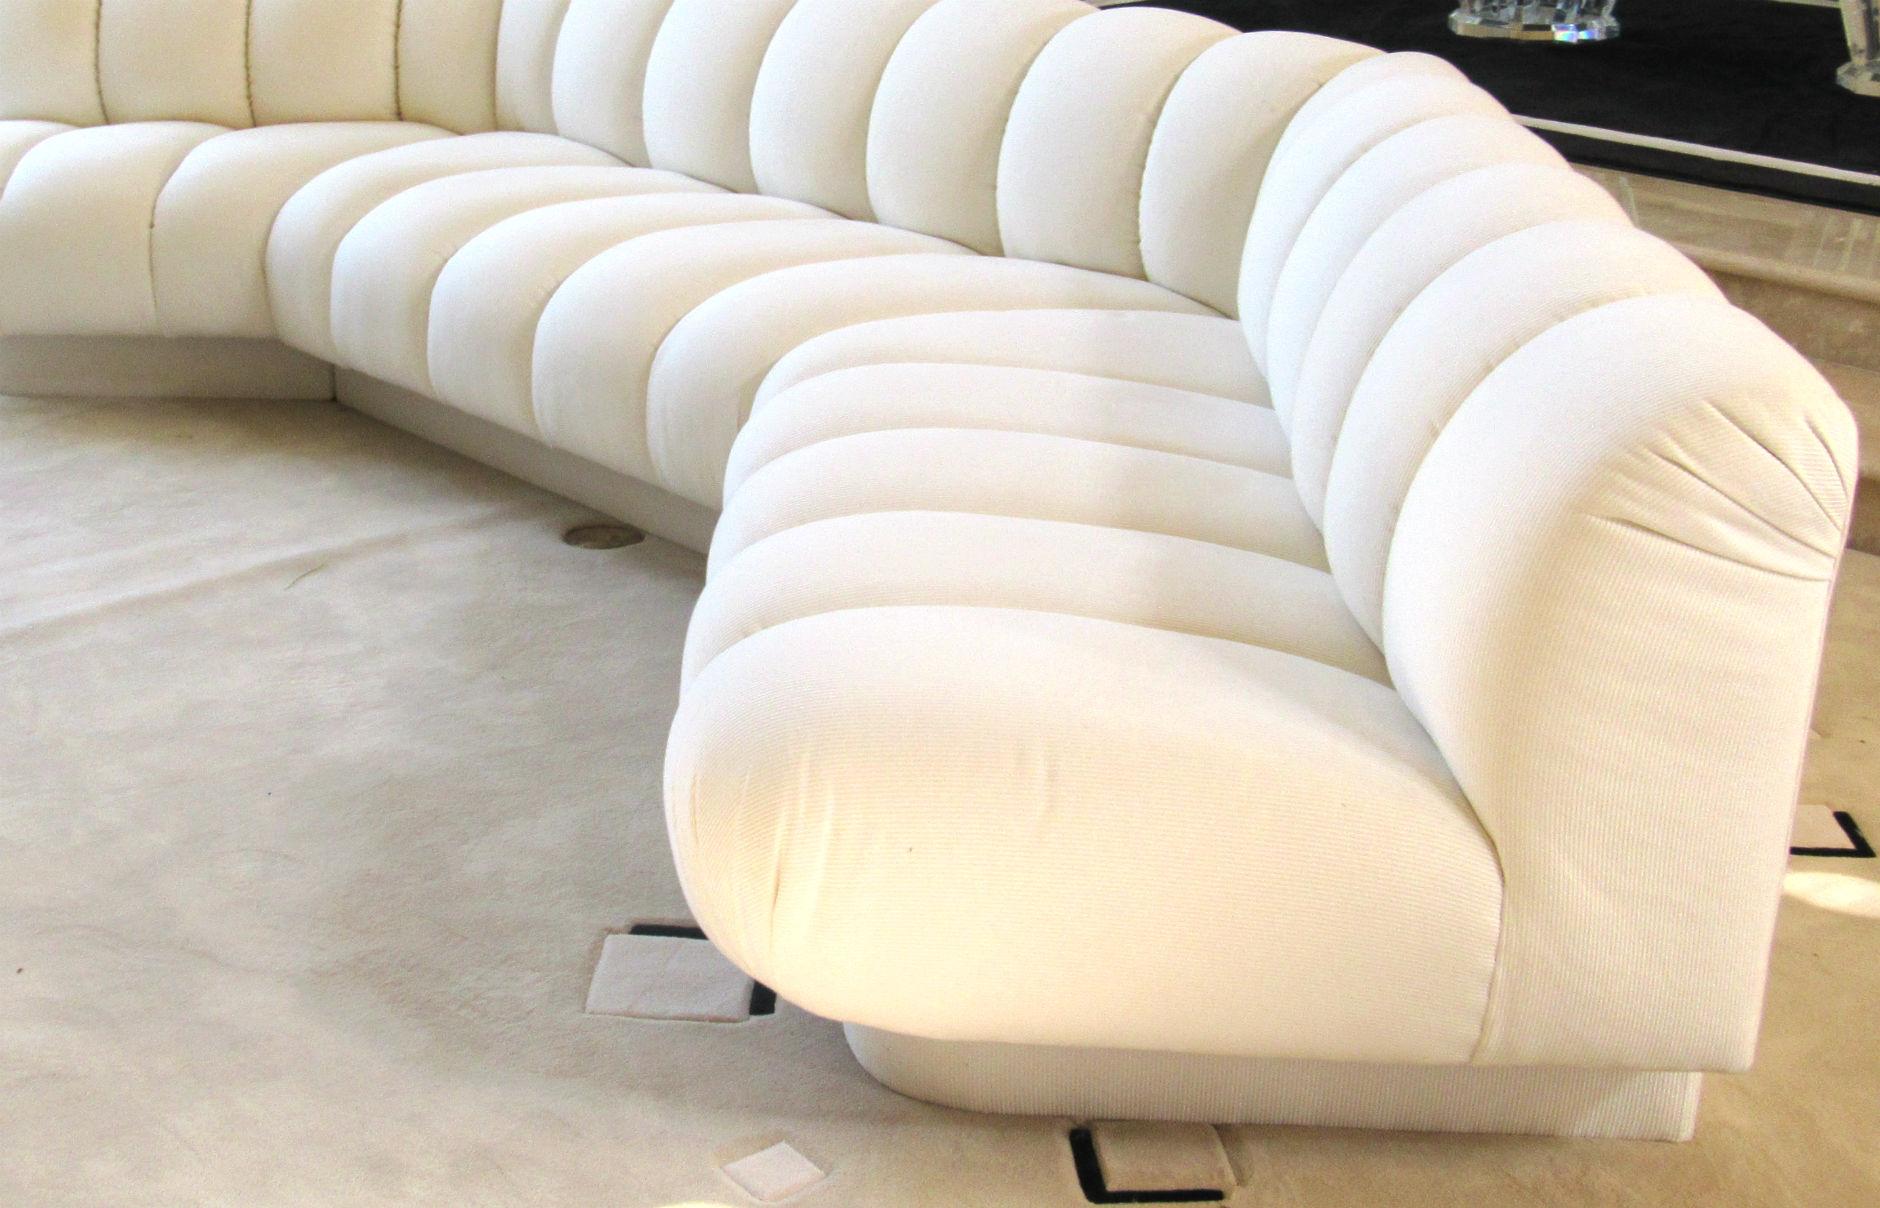 American Channel Tufted White Sofa by Steve Chase, 1980s